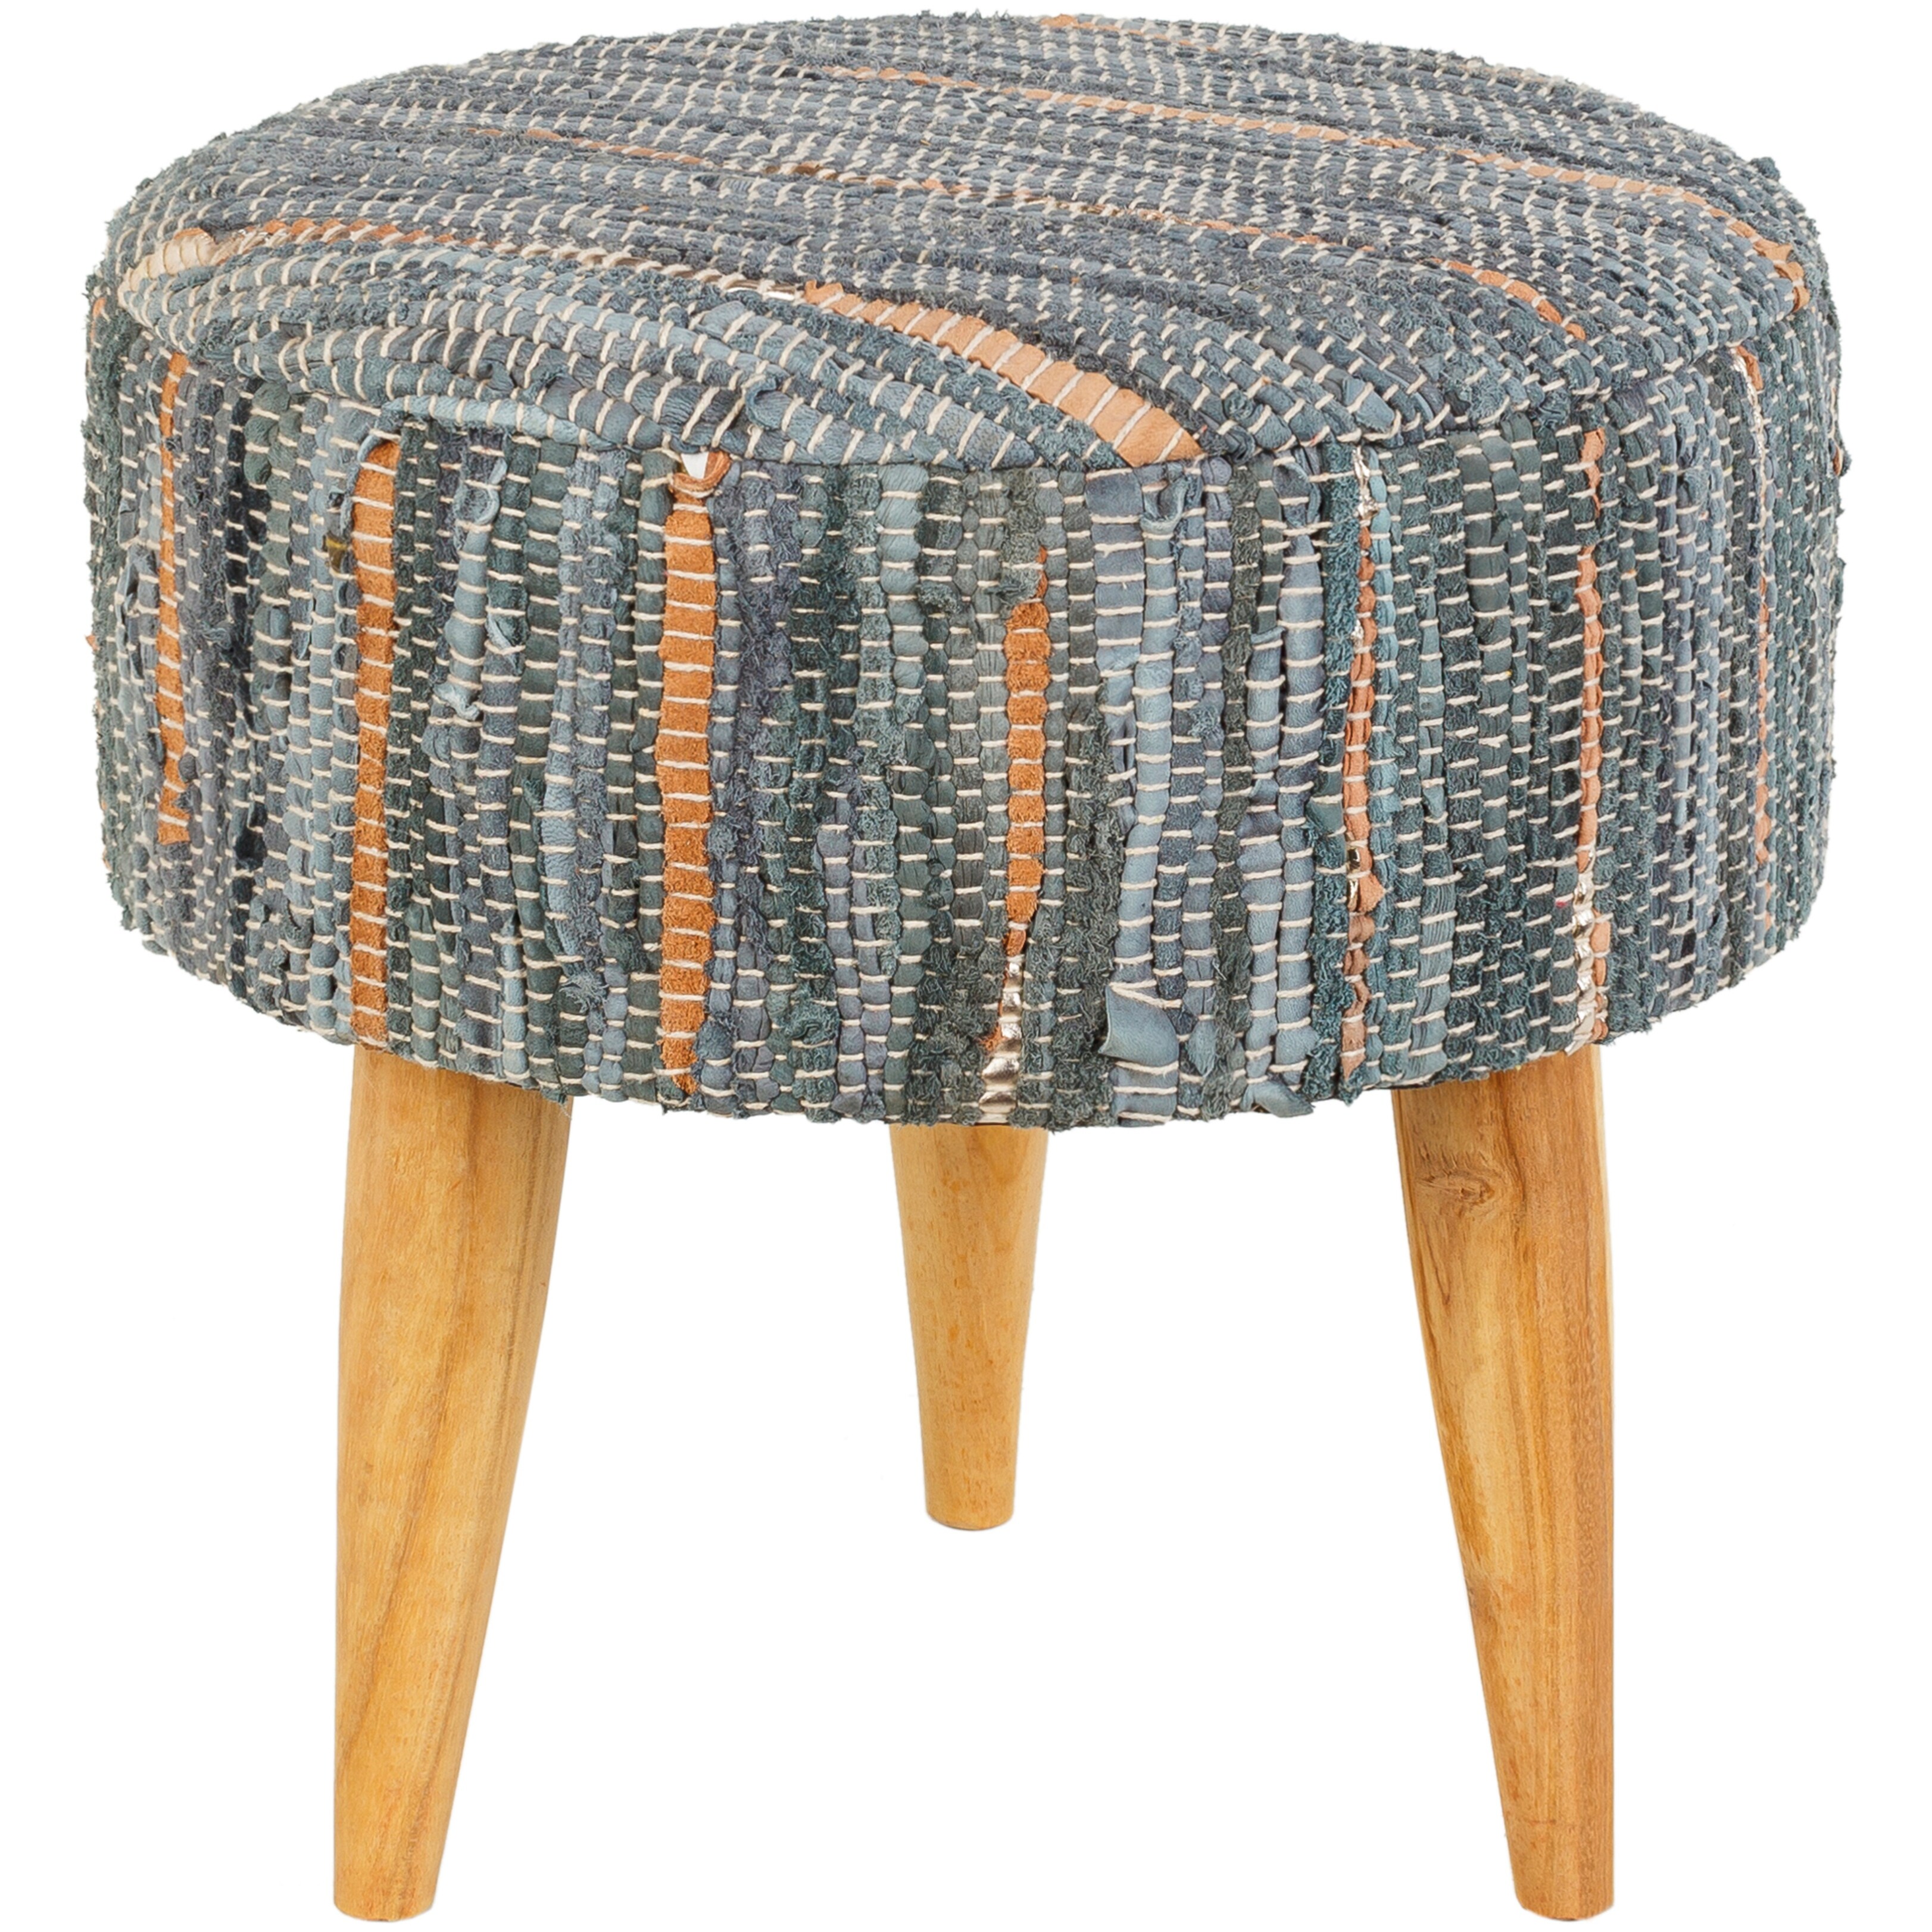 Artistic Weavers Bina Leather Textured Stripe Stool with Metallic Accents